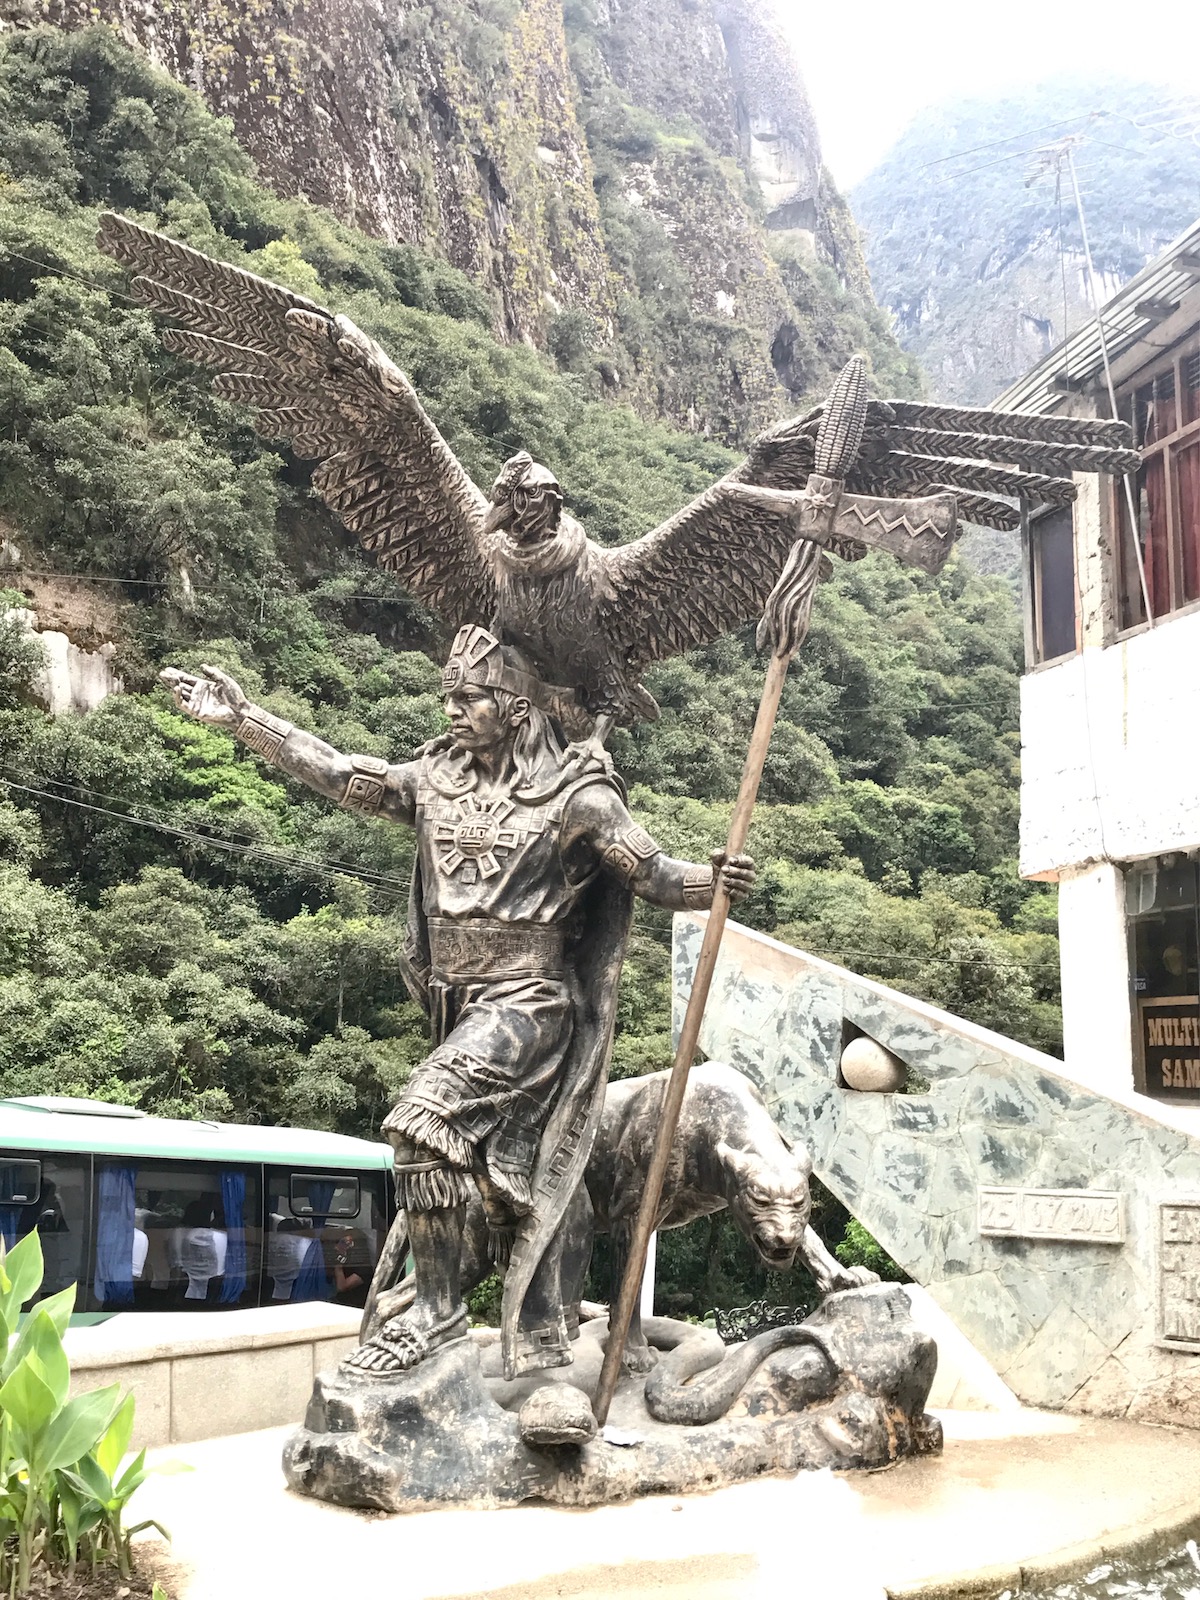 A majestic statue of an Inca warrior with a large bird of prey on his shoulders and. a sphere in his hand in Aguas Calientes, Peru